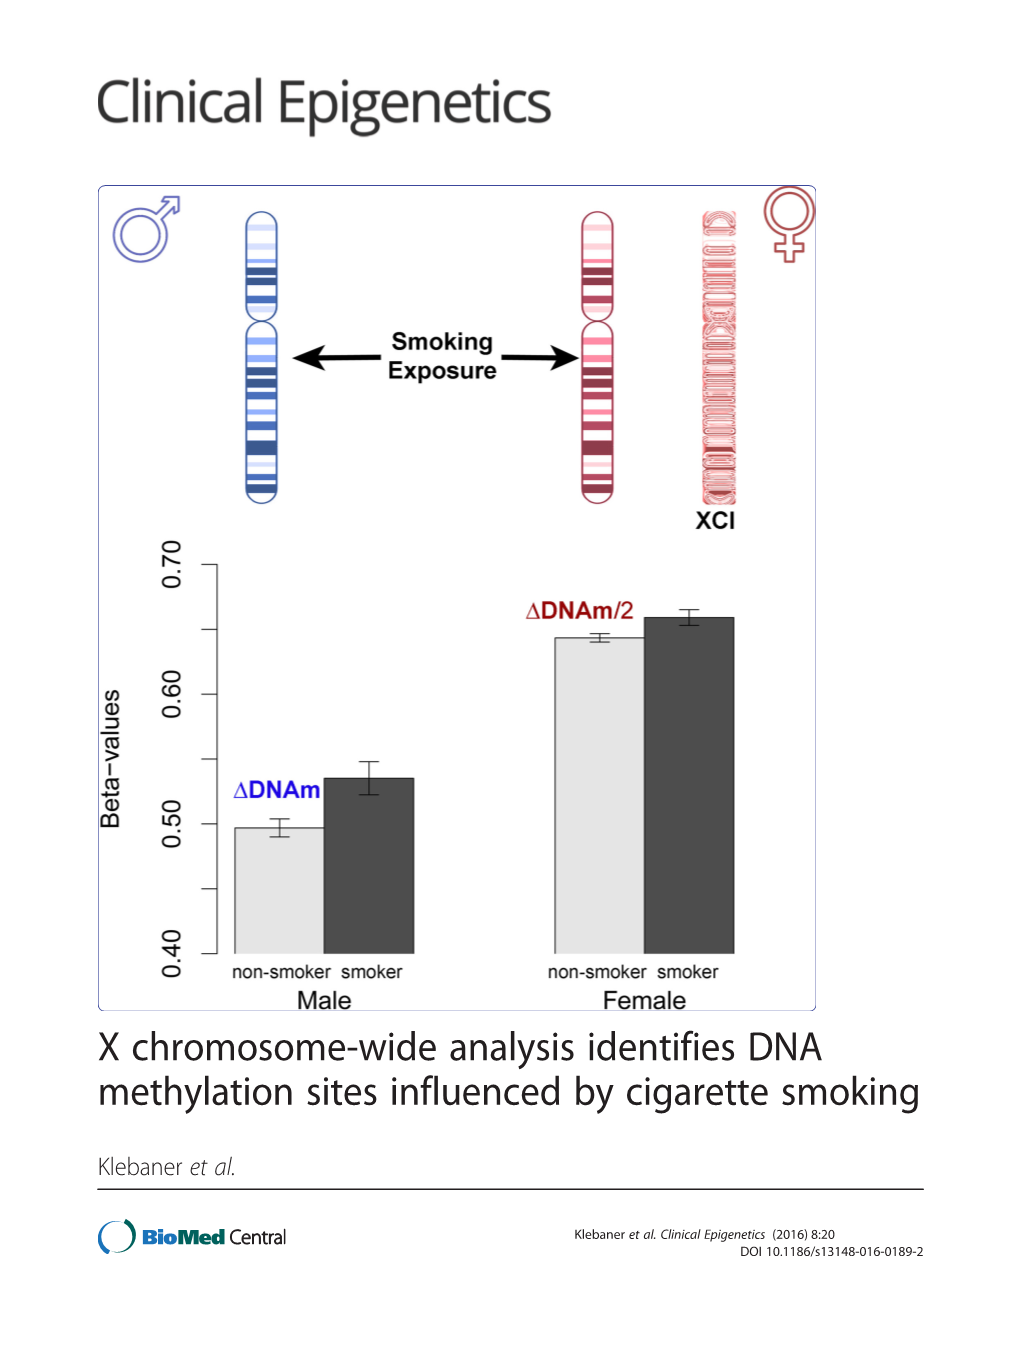 X Chromosome-Wide Analysis Identifies DNA Methylation Sites Influenced by Cigarette Smoking